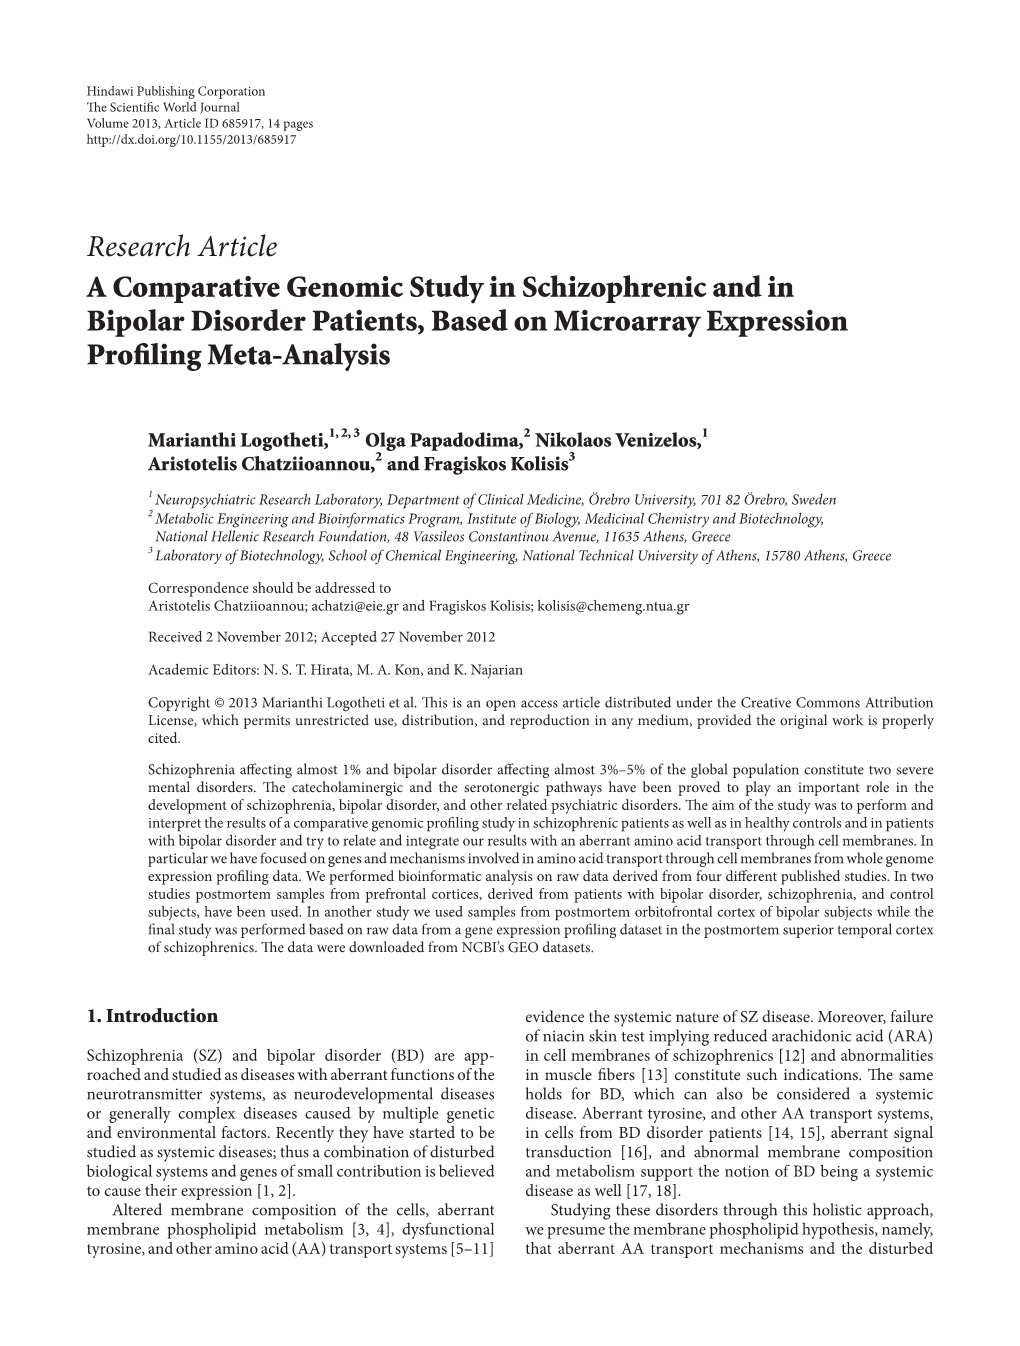 Research Article a Comparative Genomic Study in Schizophrenic and in Bipolar Disorder Patients, Based on Microarray Expression Pro�Ling Meta�Analysis